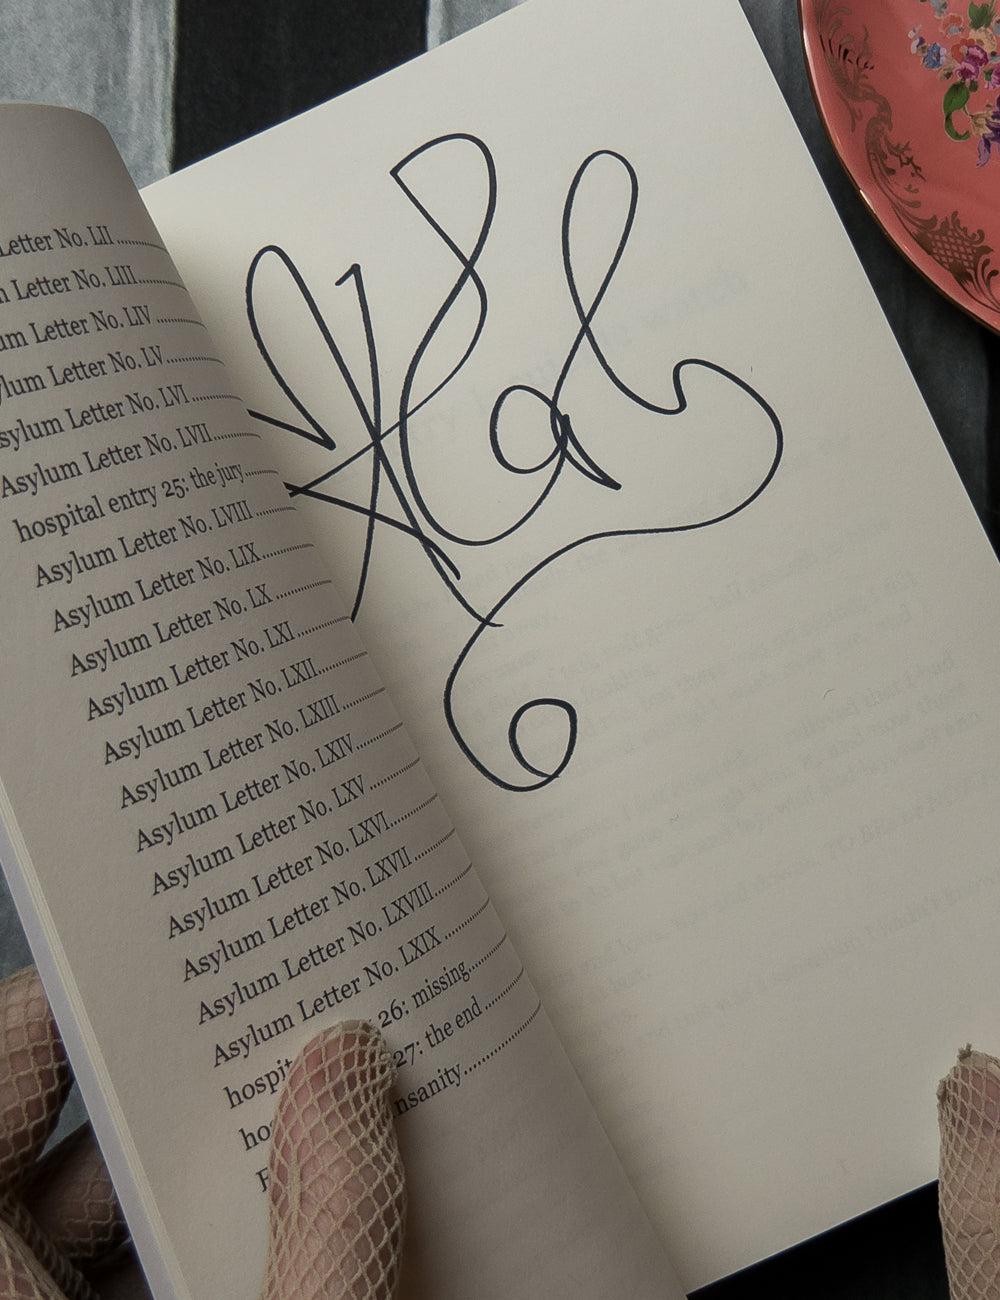 CUSTOM Autographed Asylum Book with Full Page Dedication